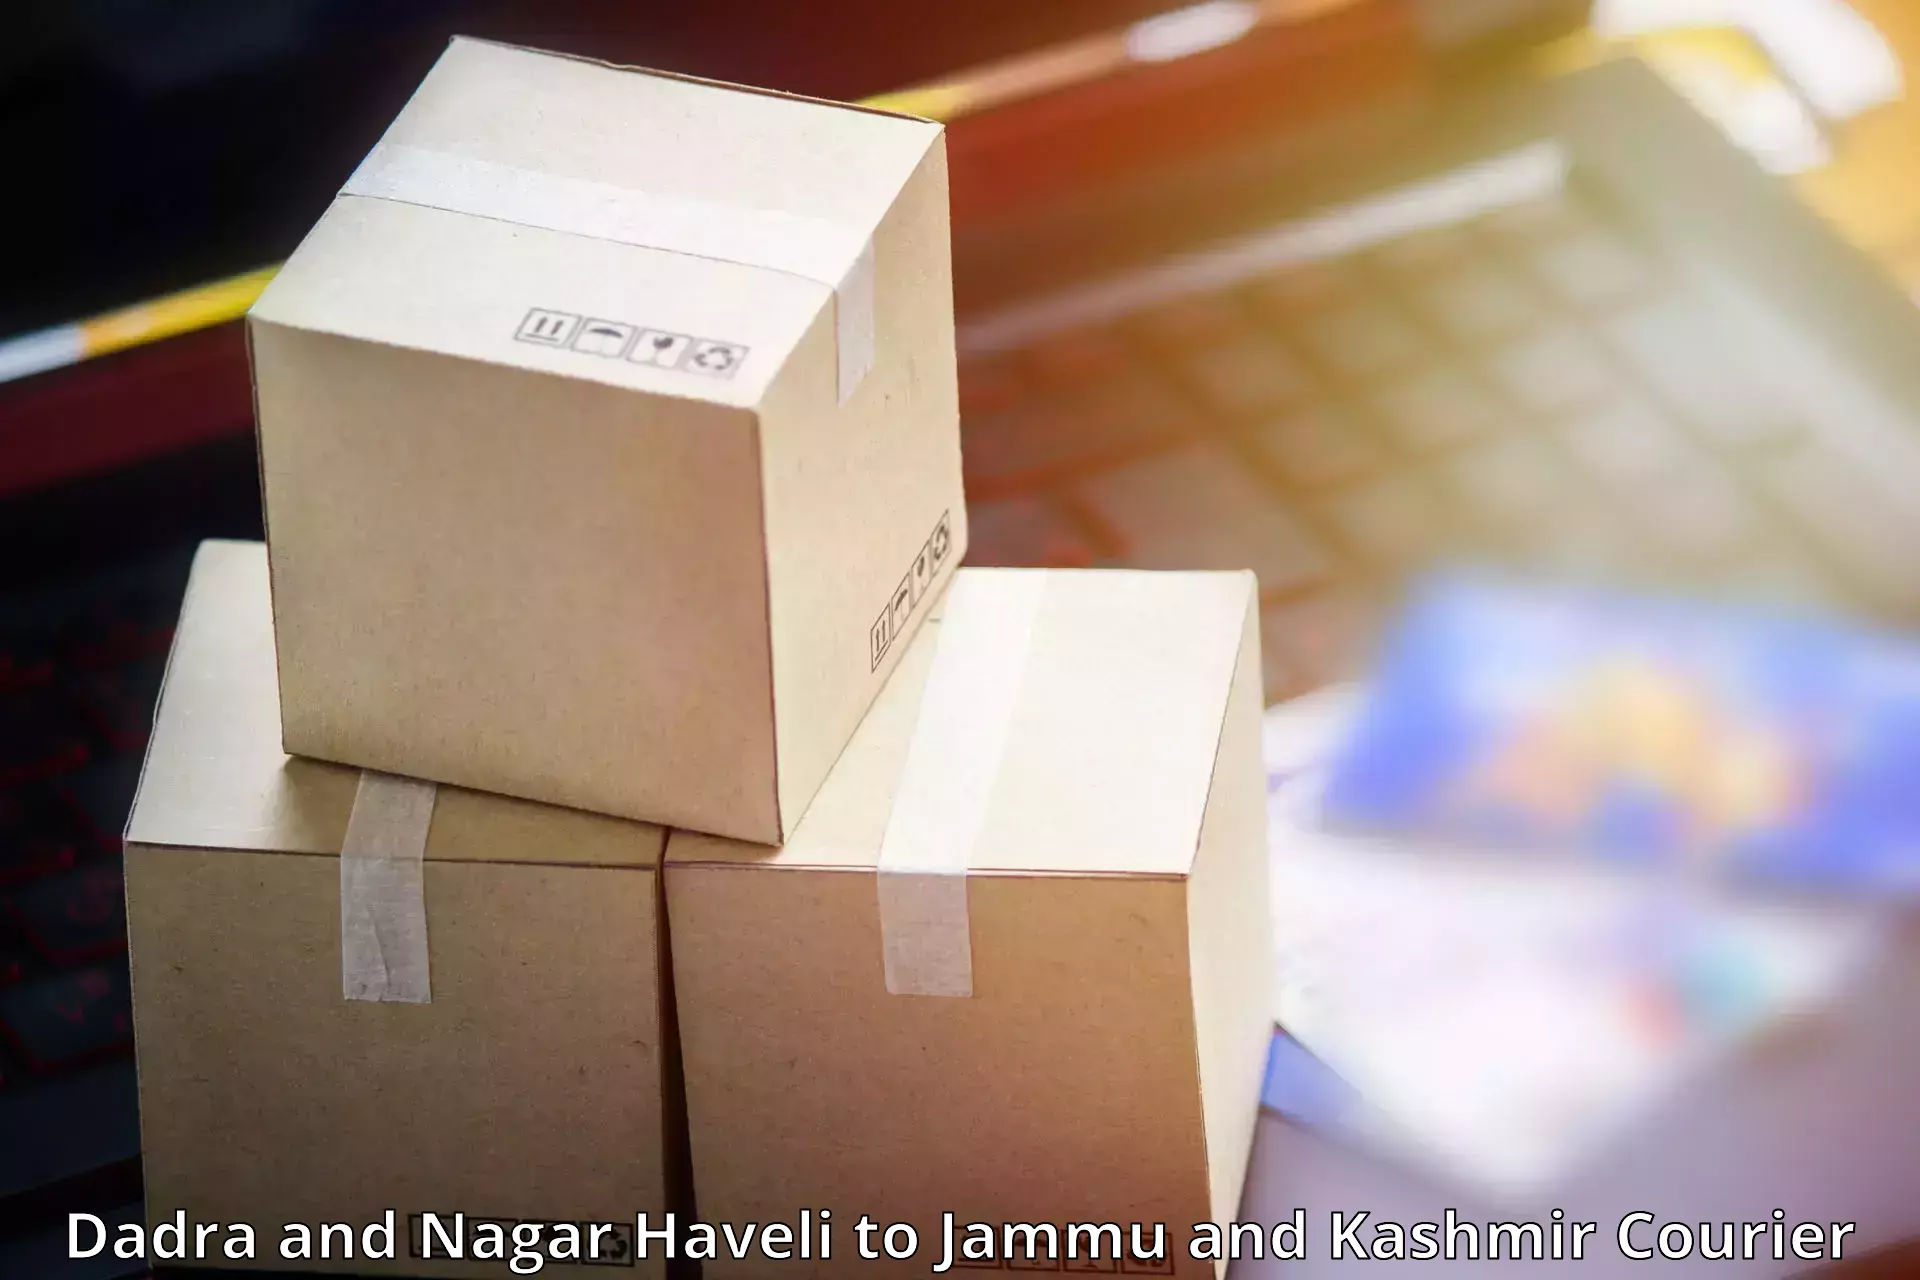 State-of-the-art courier technology Dadra and Nagar Haveli to Anantnag